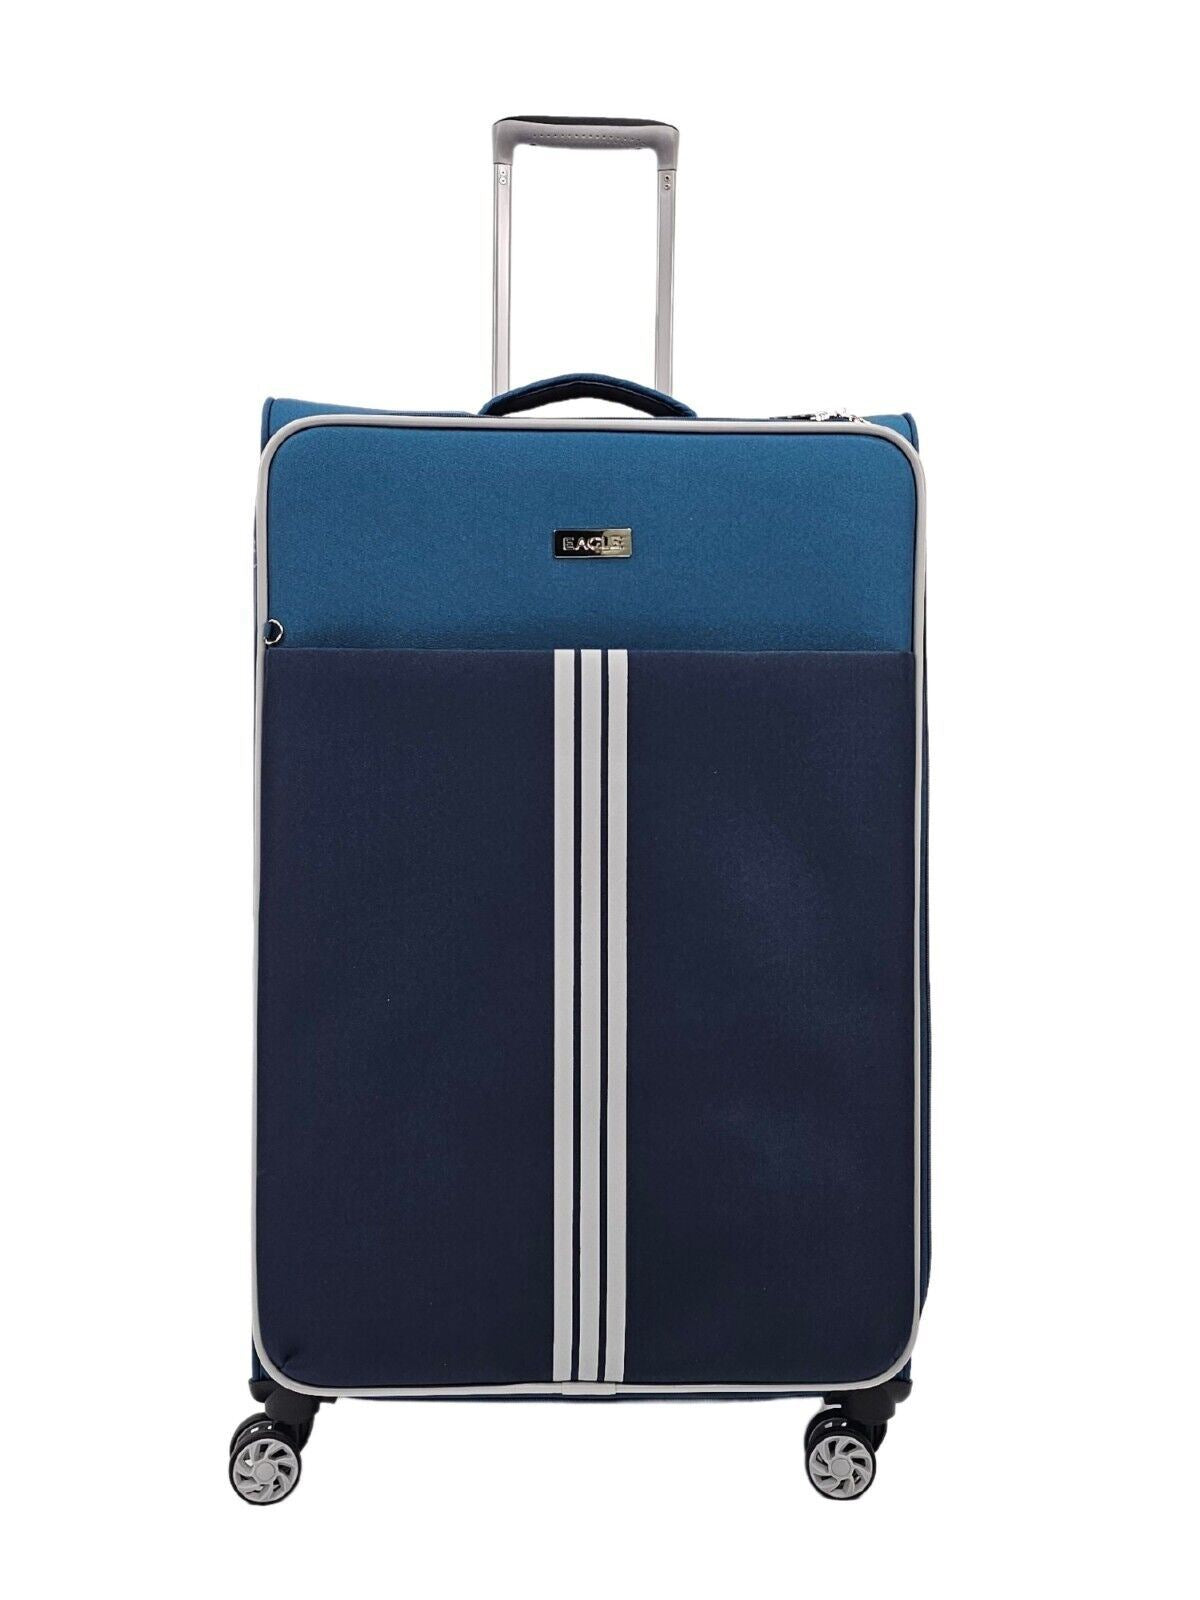 Beaverton Large Soft Shell Suitcase in Teal